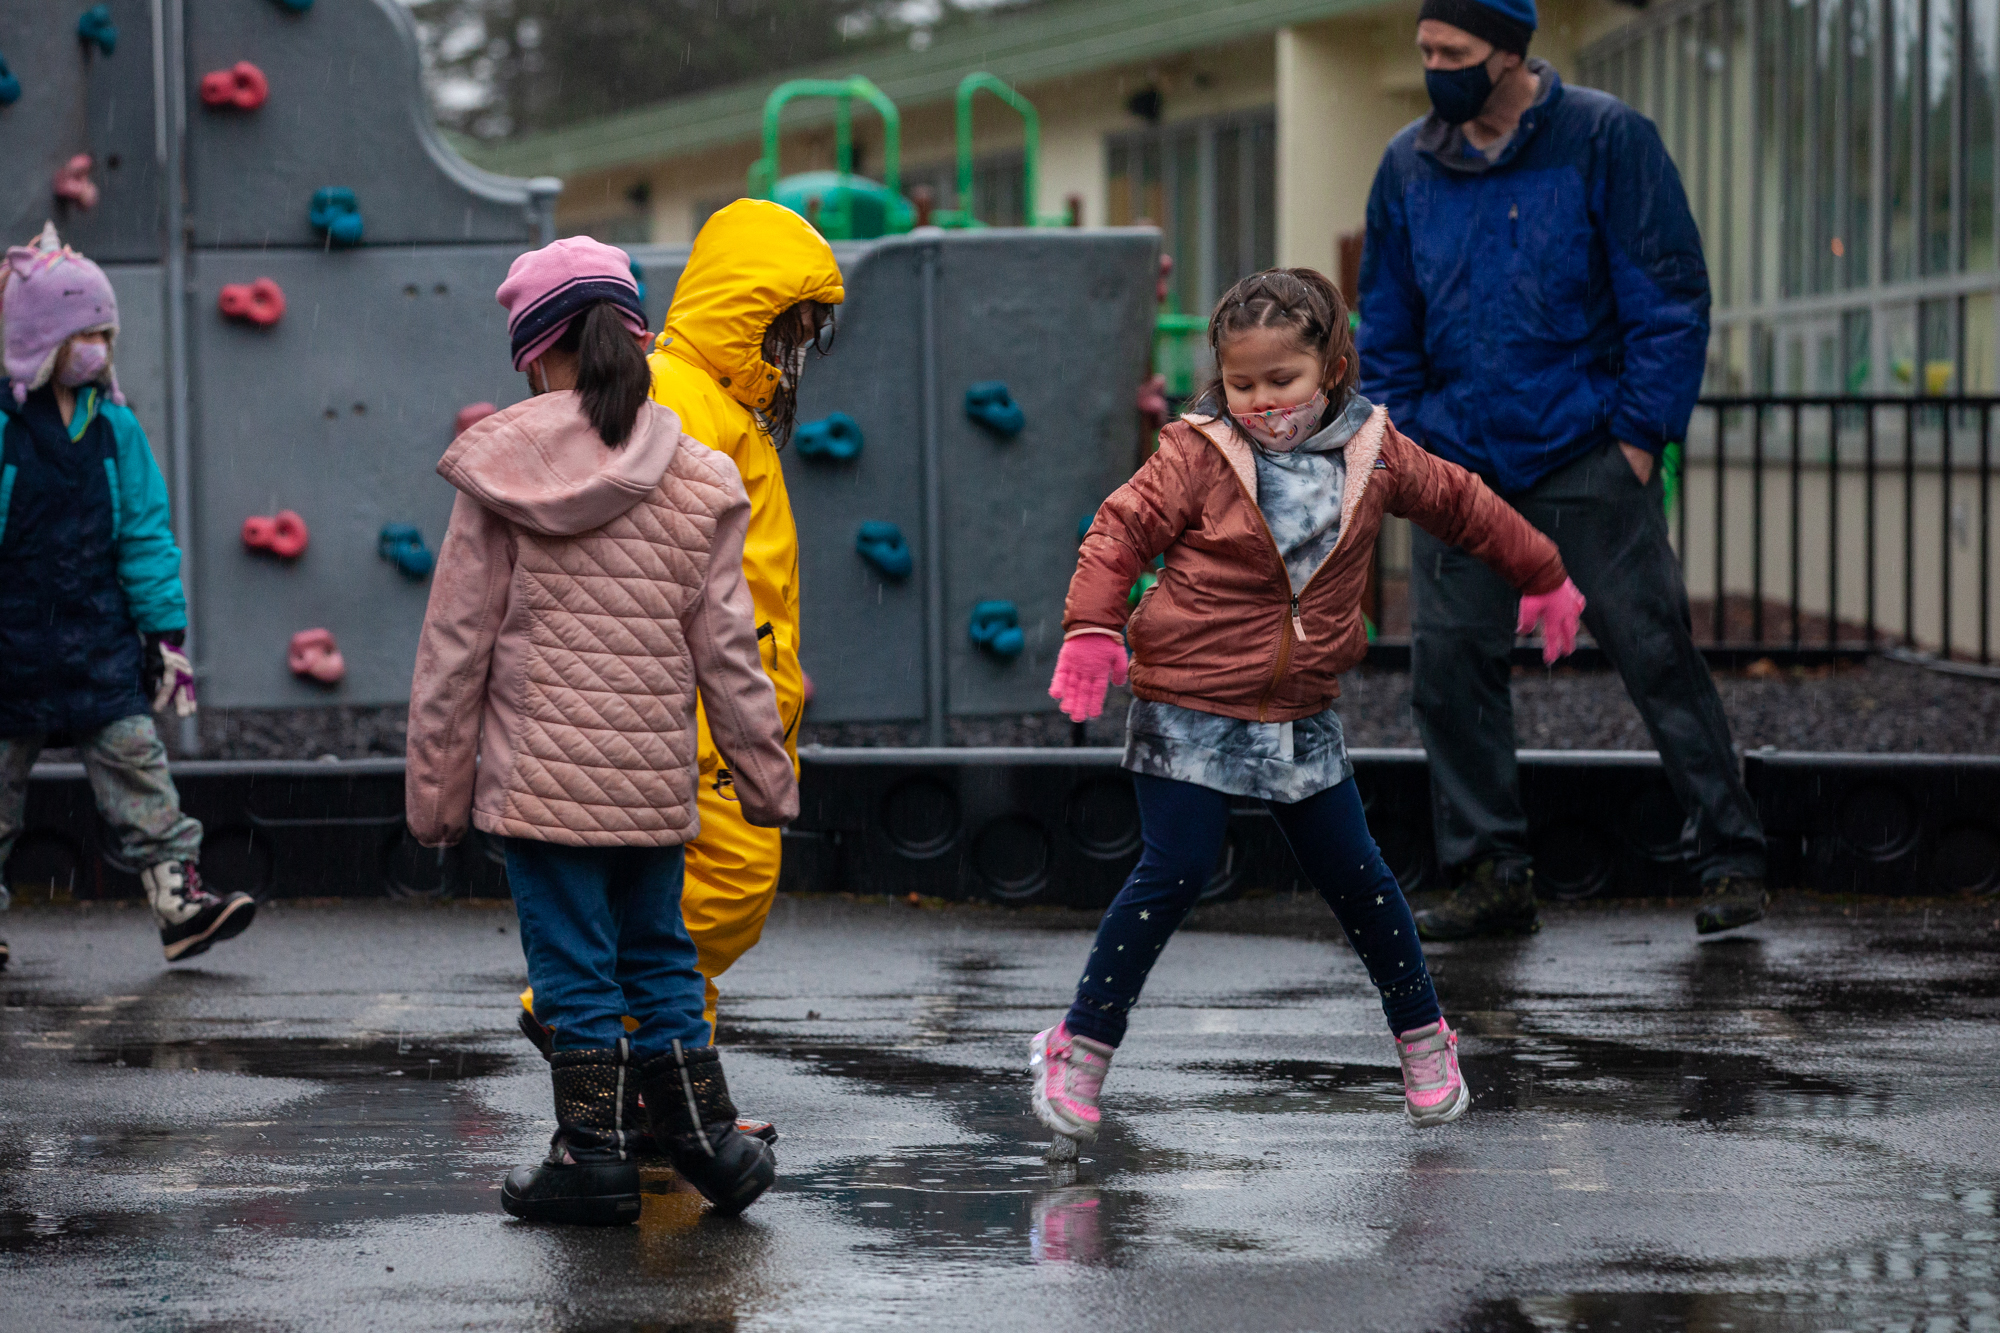 Avery Barnaby dances on the playground during her first day back to school as a first-grader at Sayéik Gastineau Community School on Thursday, Jan. 14, 2021, in Juneau, Alaska. (Photo by Rashah McChesney/KTOO)